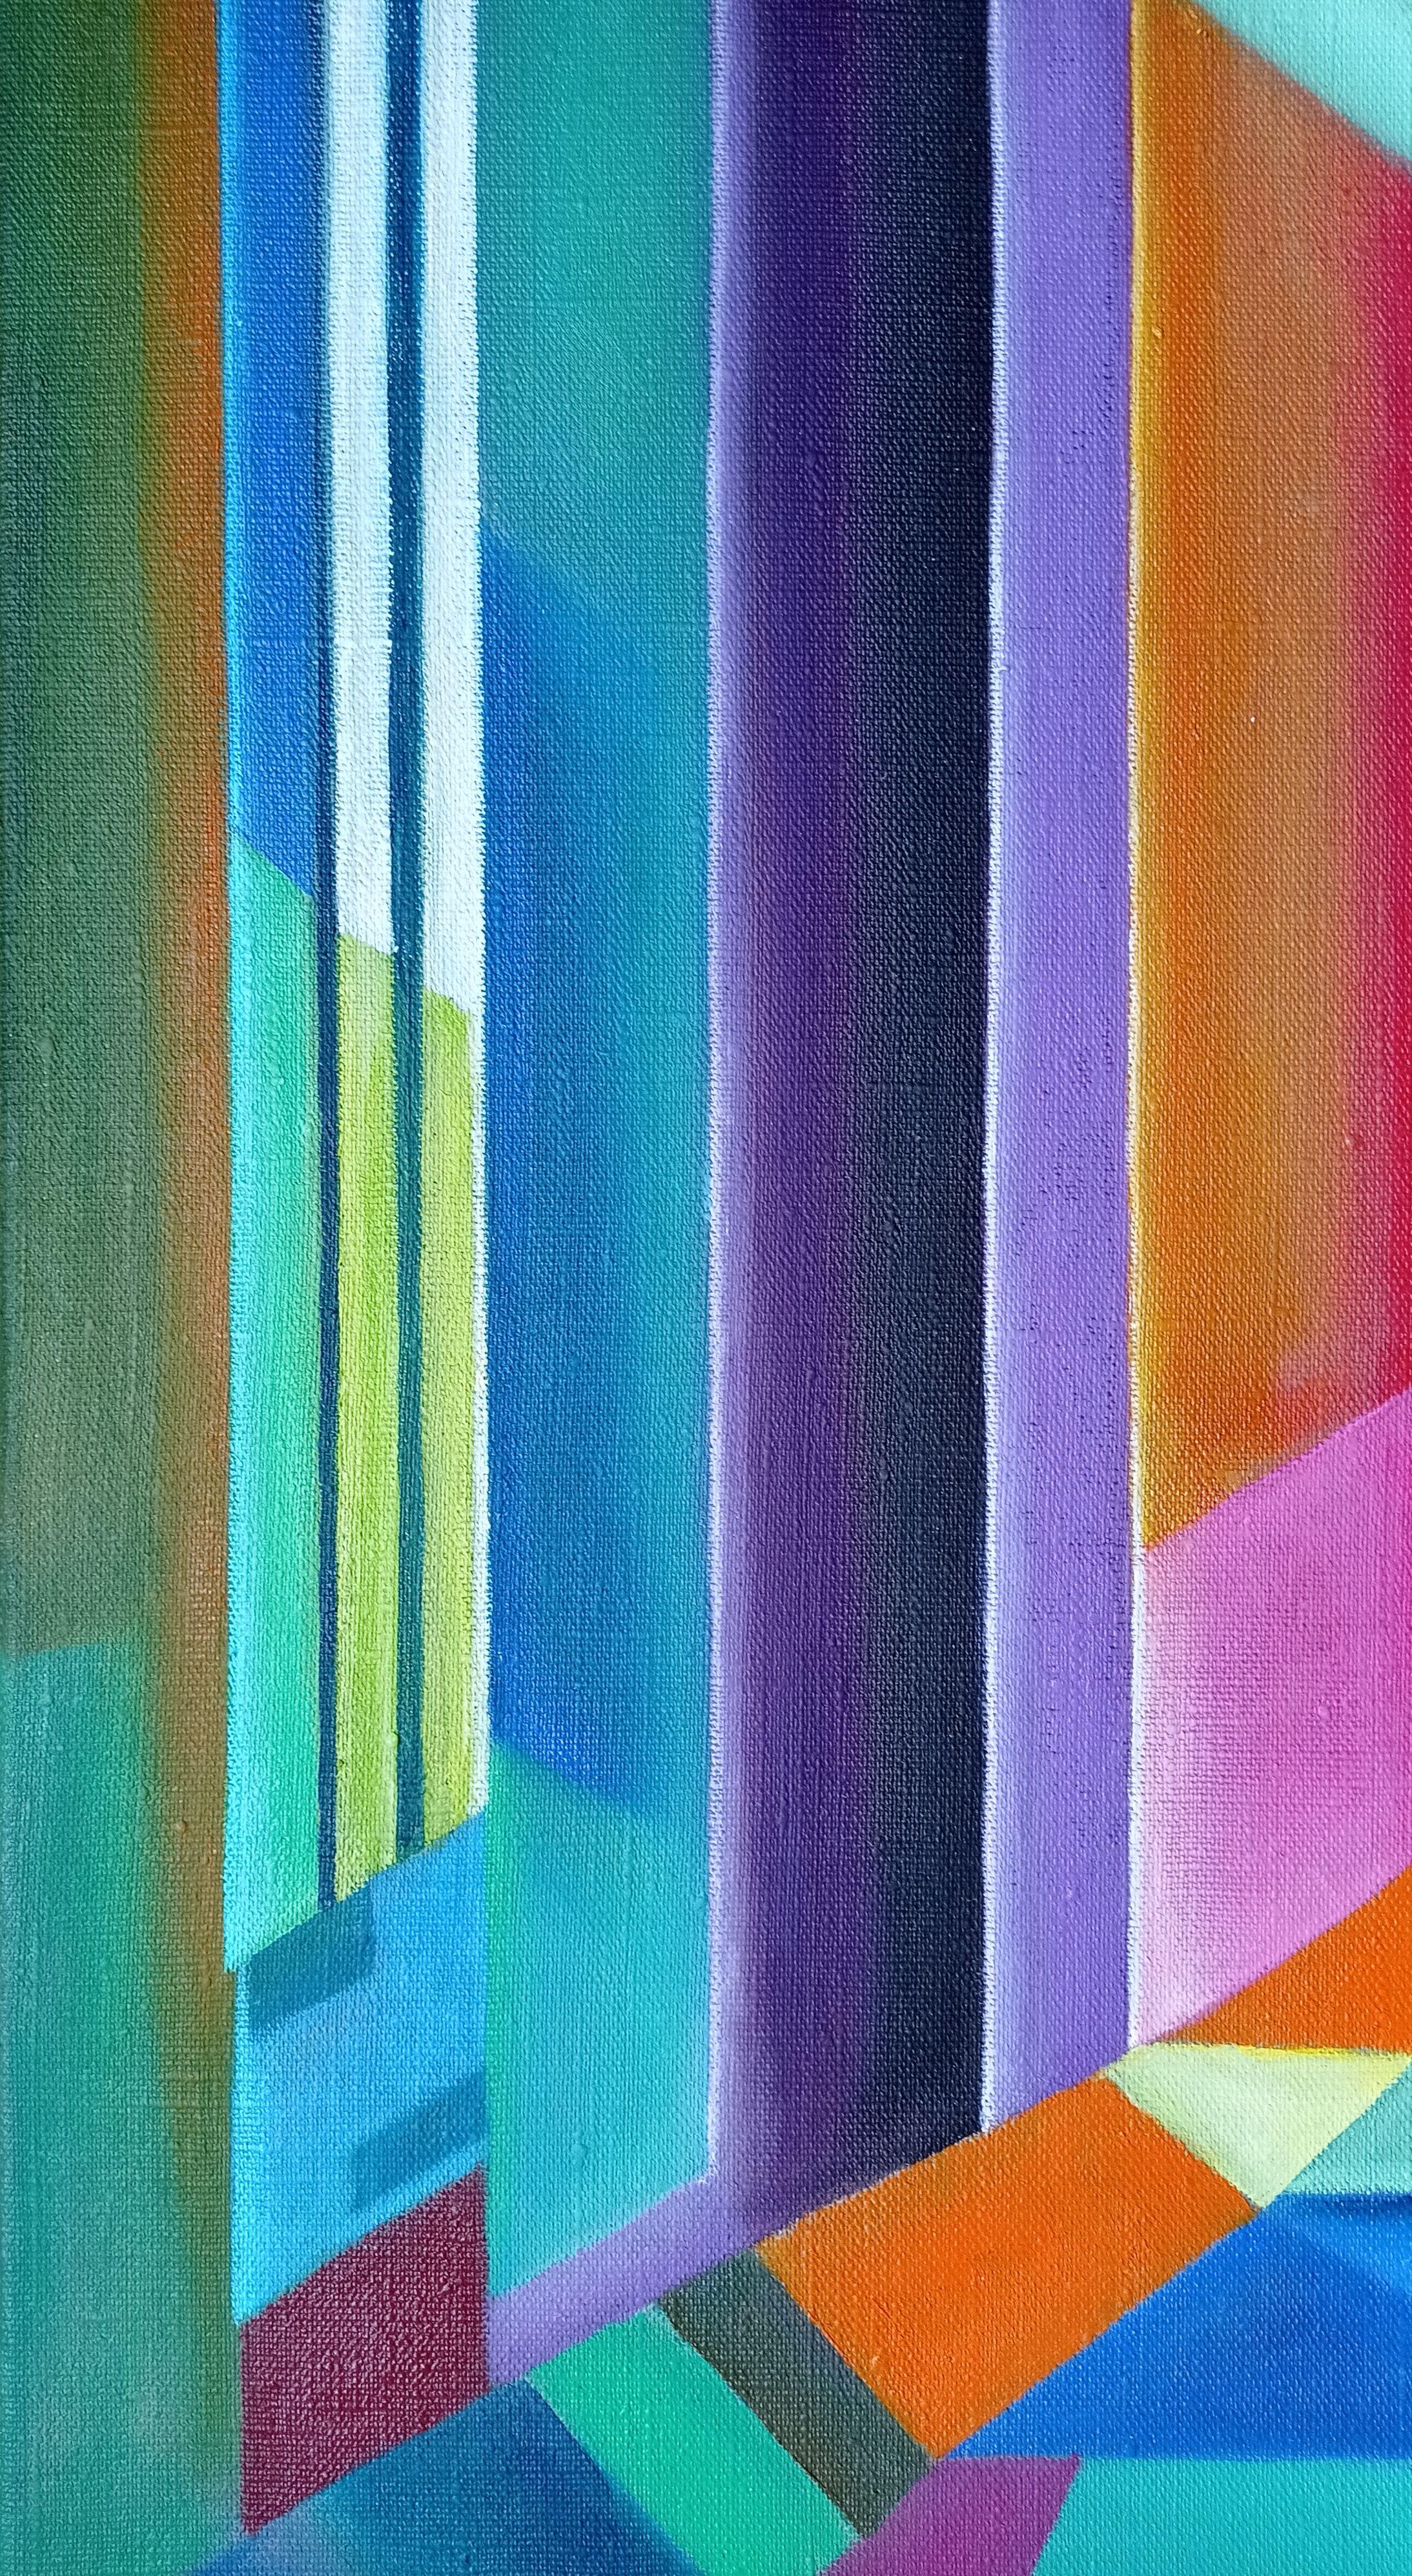 Gates to your dreams. 2023., oil on linen, 140x120 cm 4 pcs. - 70x60 cm - Abstract Geometric Painting by Alyona Prokofjeva